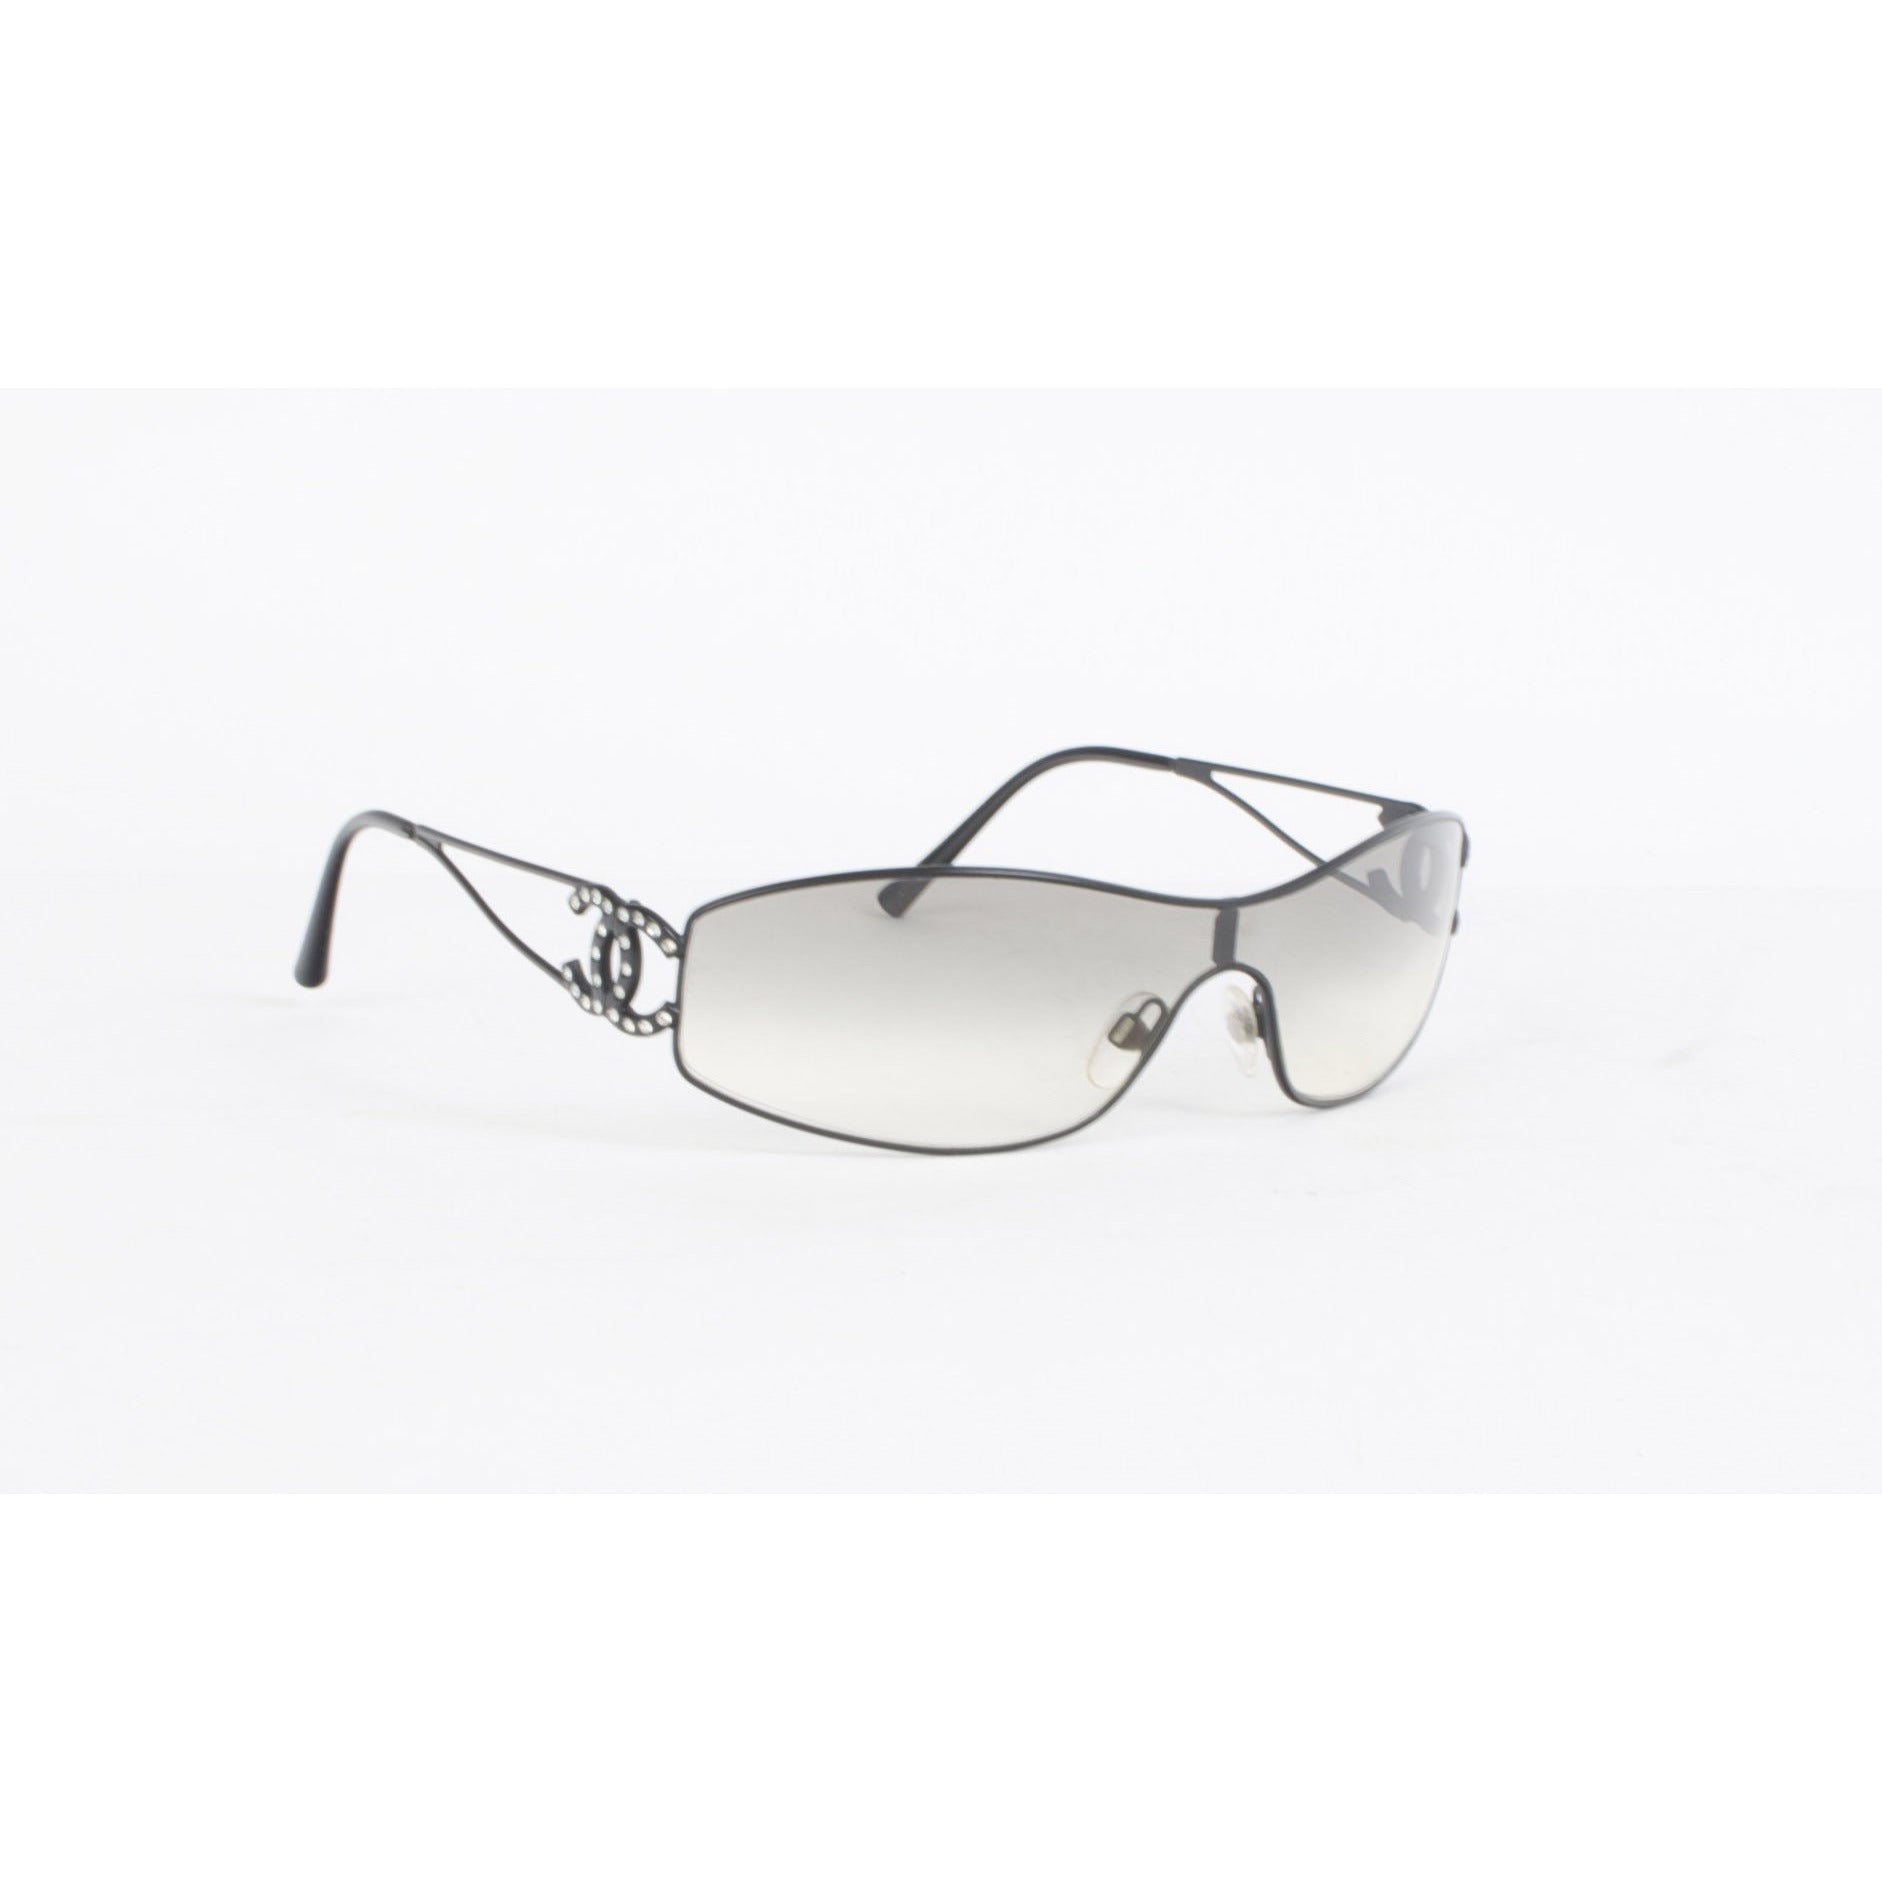 Authentic Chanel Black Sunglasses In Mother Of Pearl Monogram for